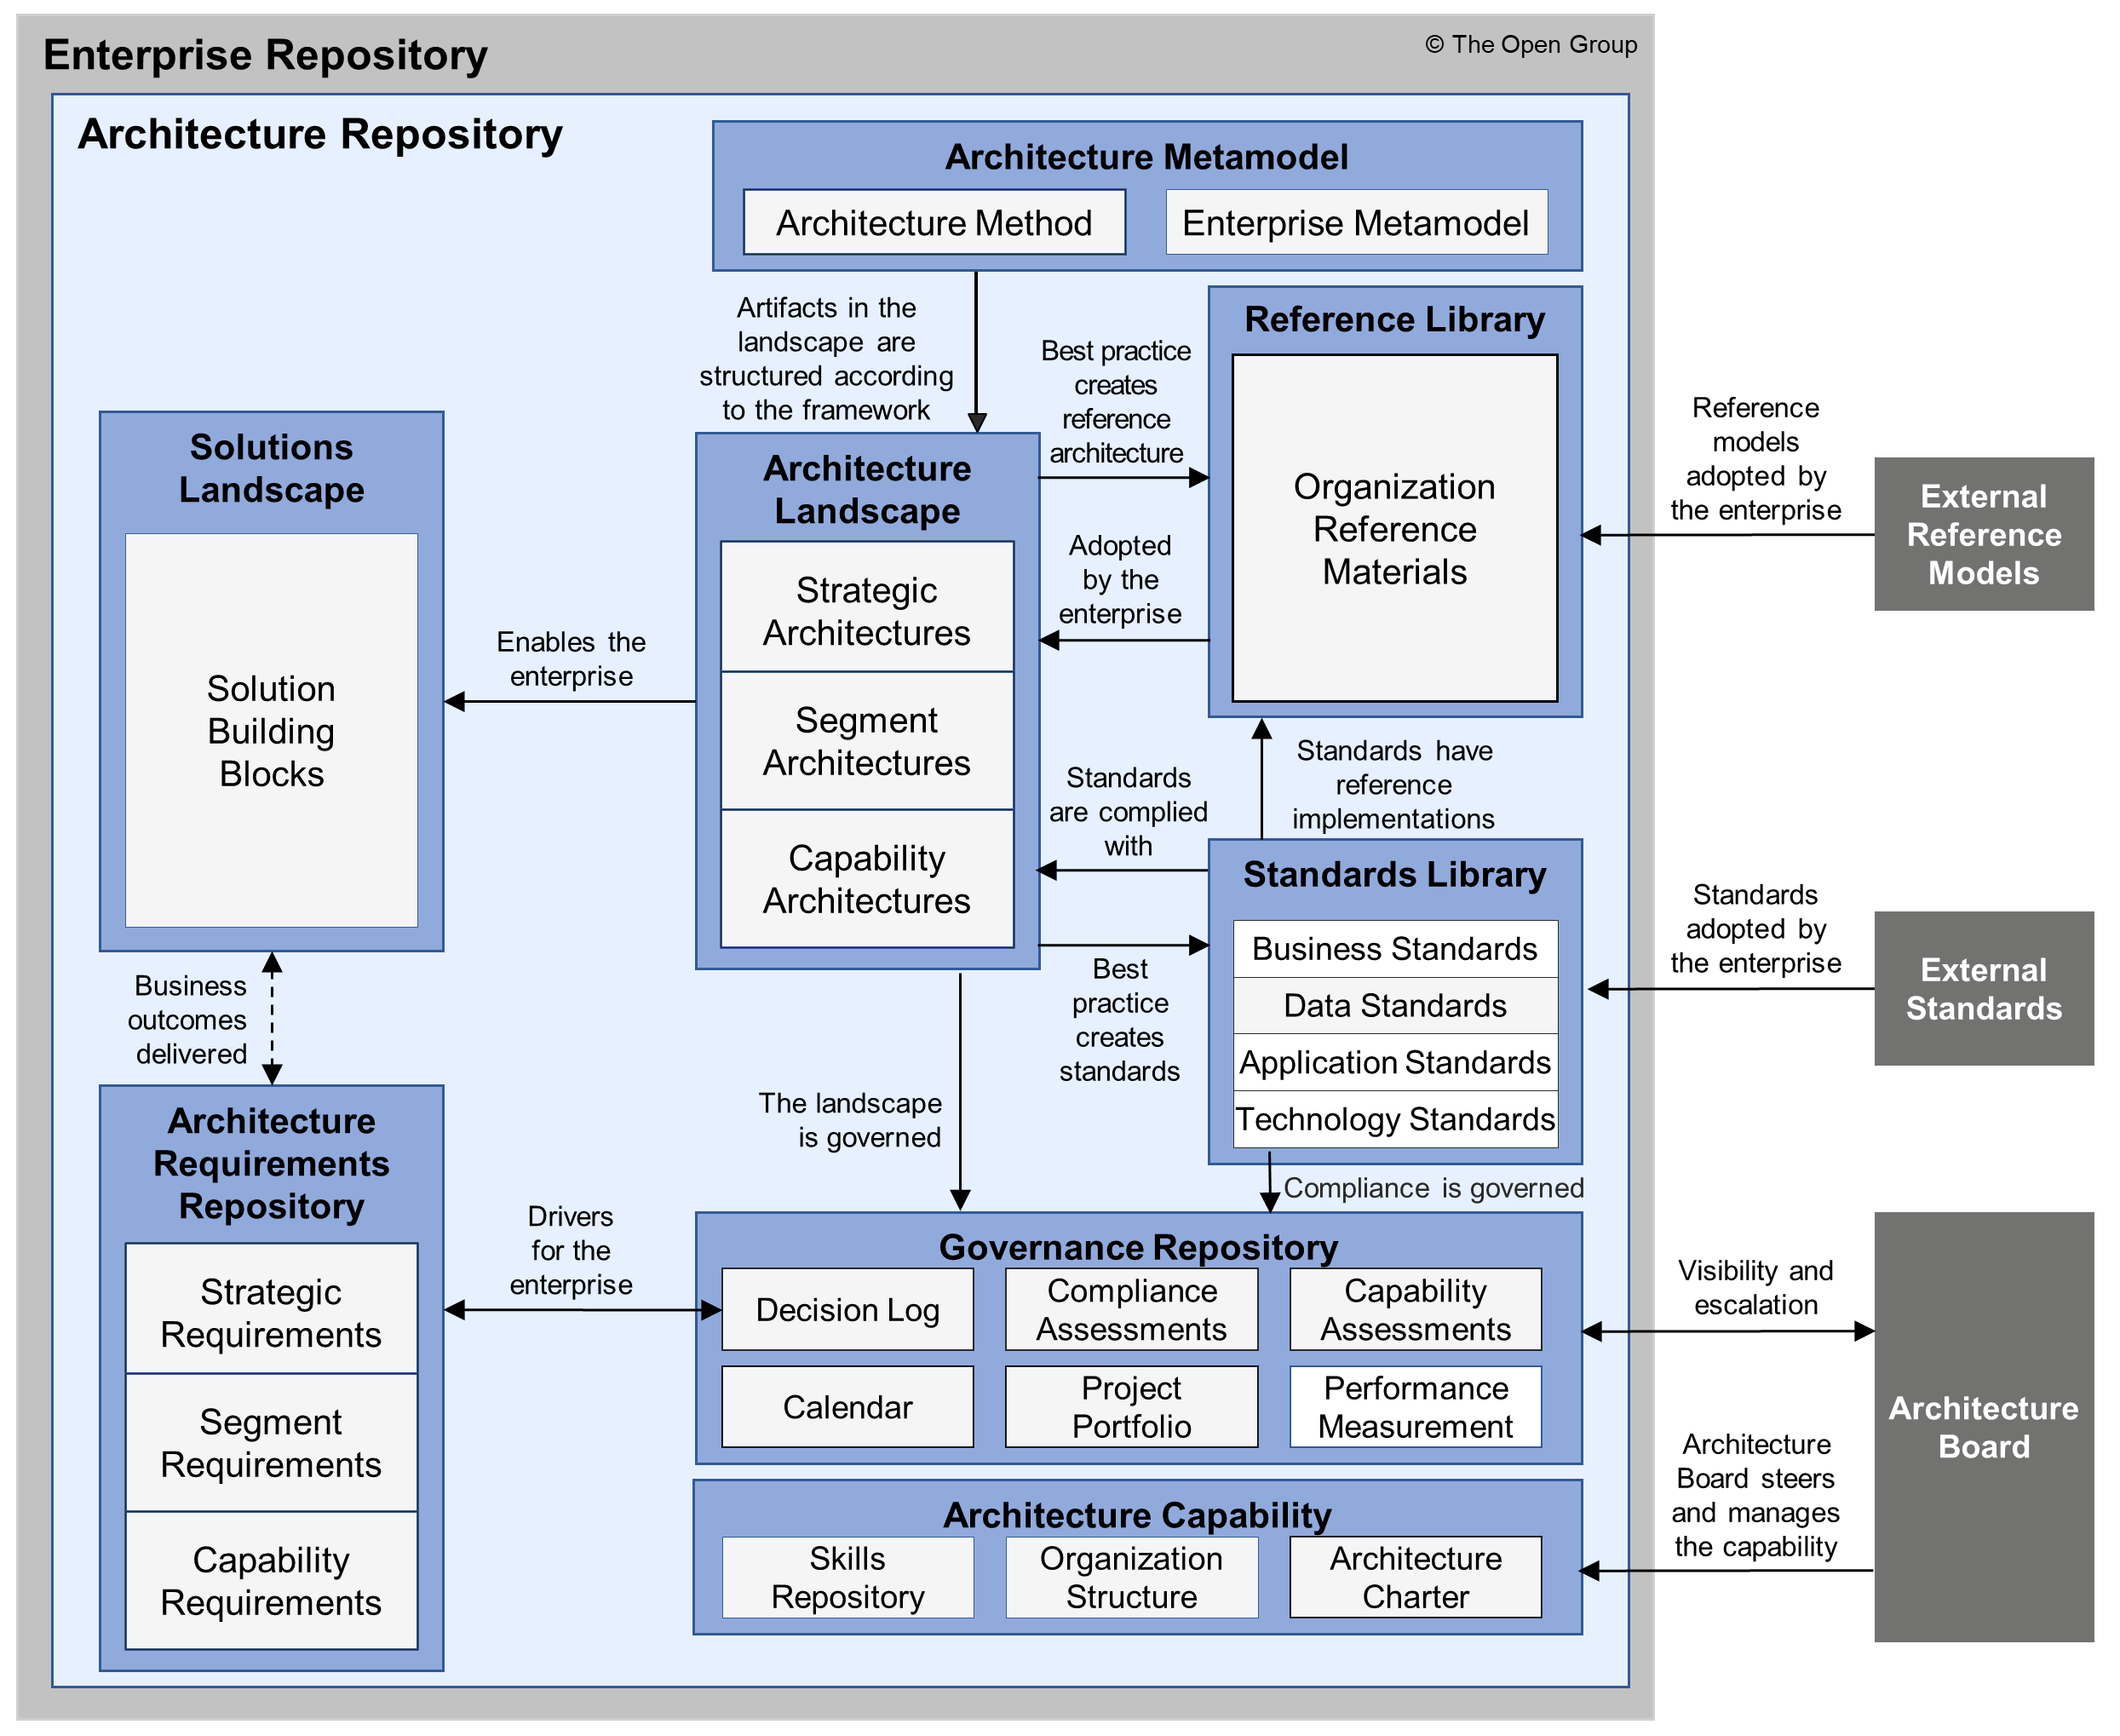 Overview of Architecture Repository